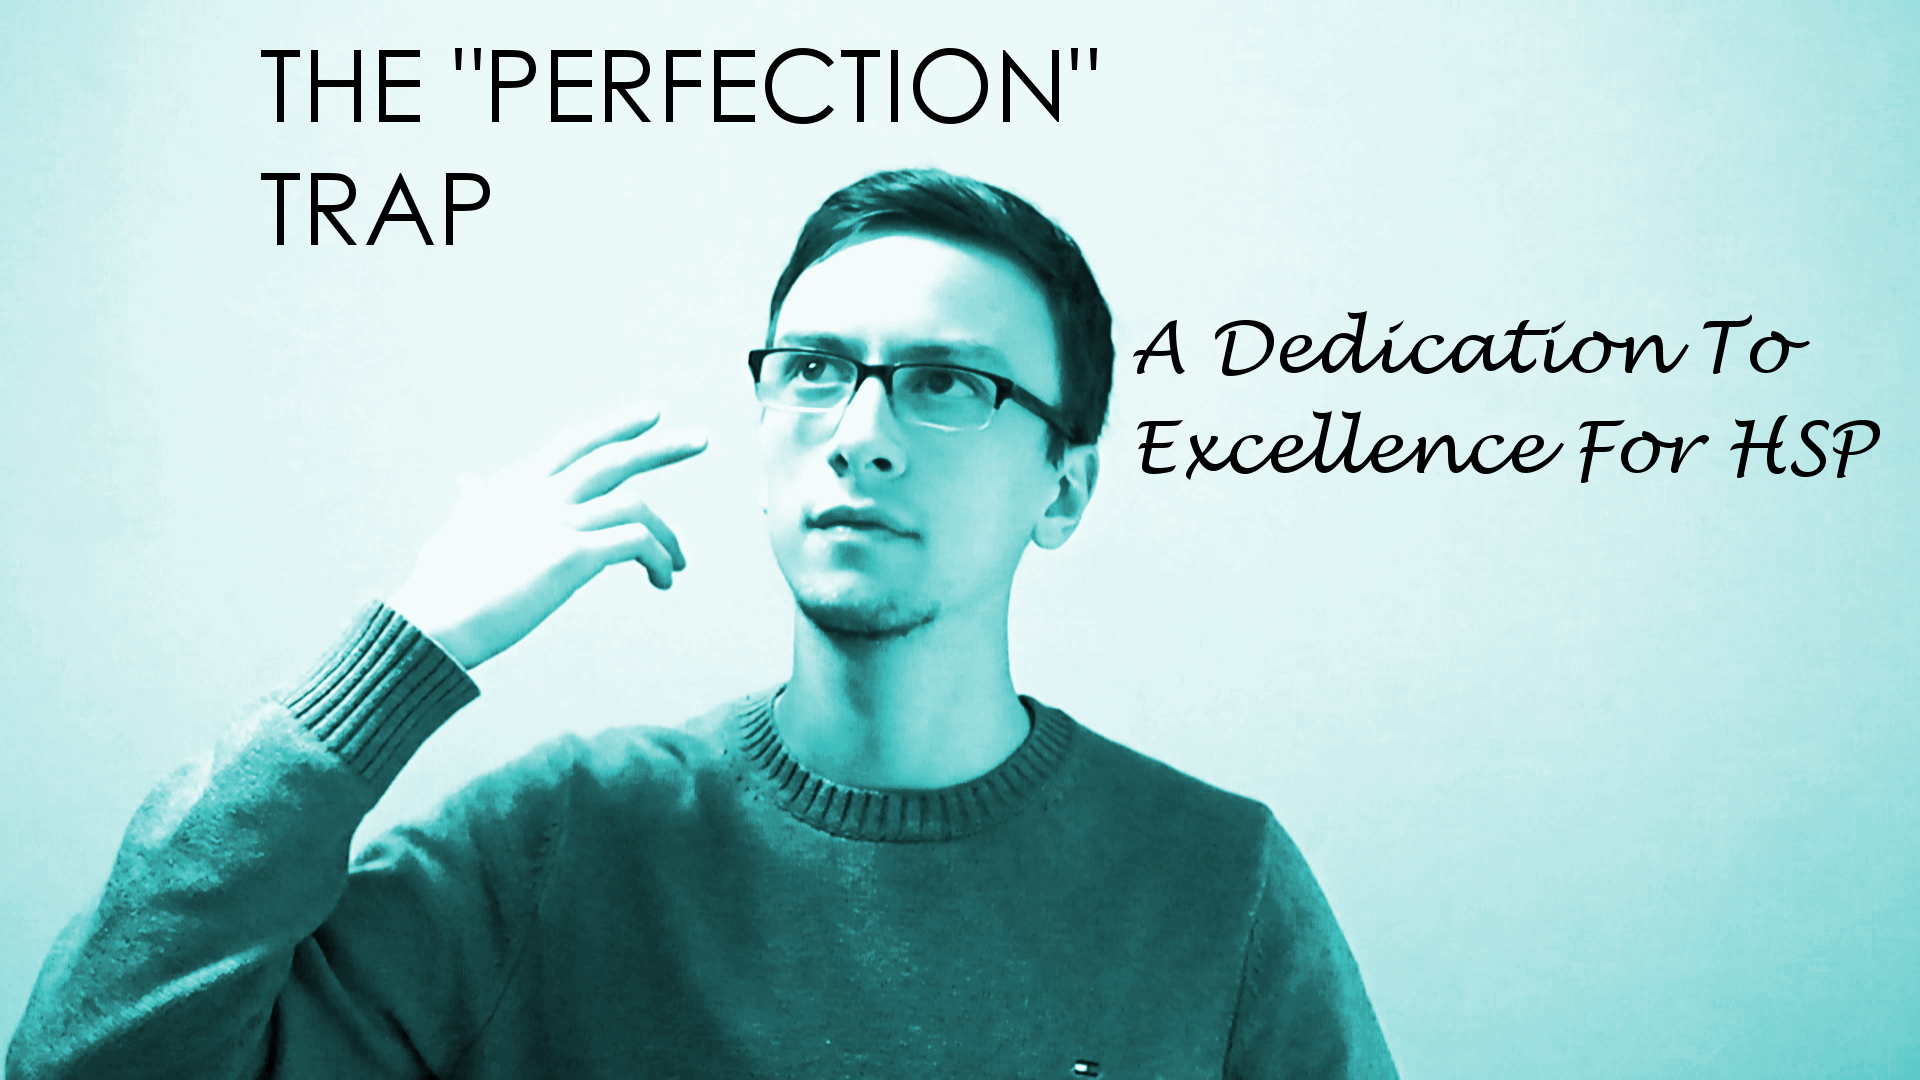 A Dedication To Excellence For HSP